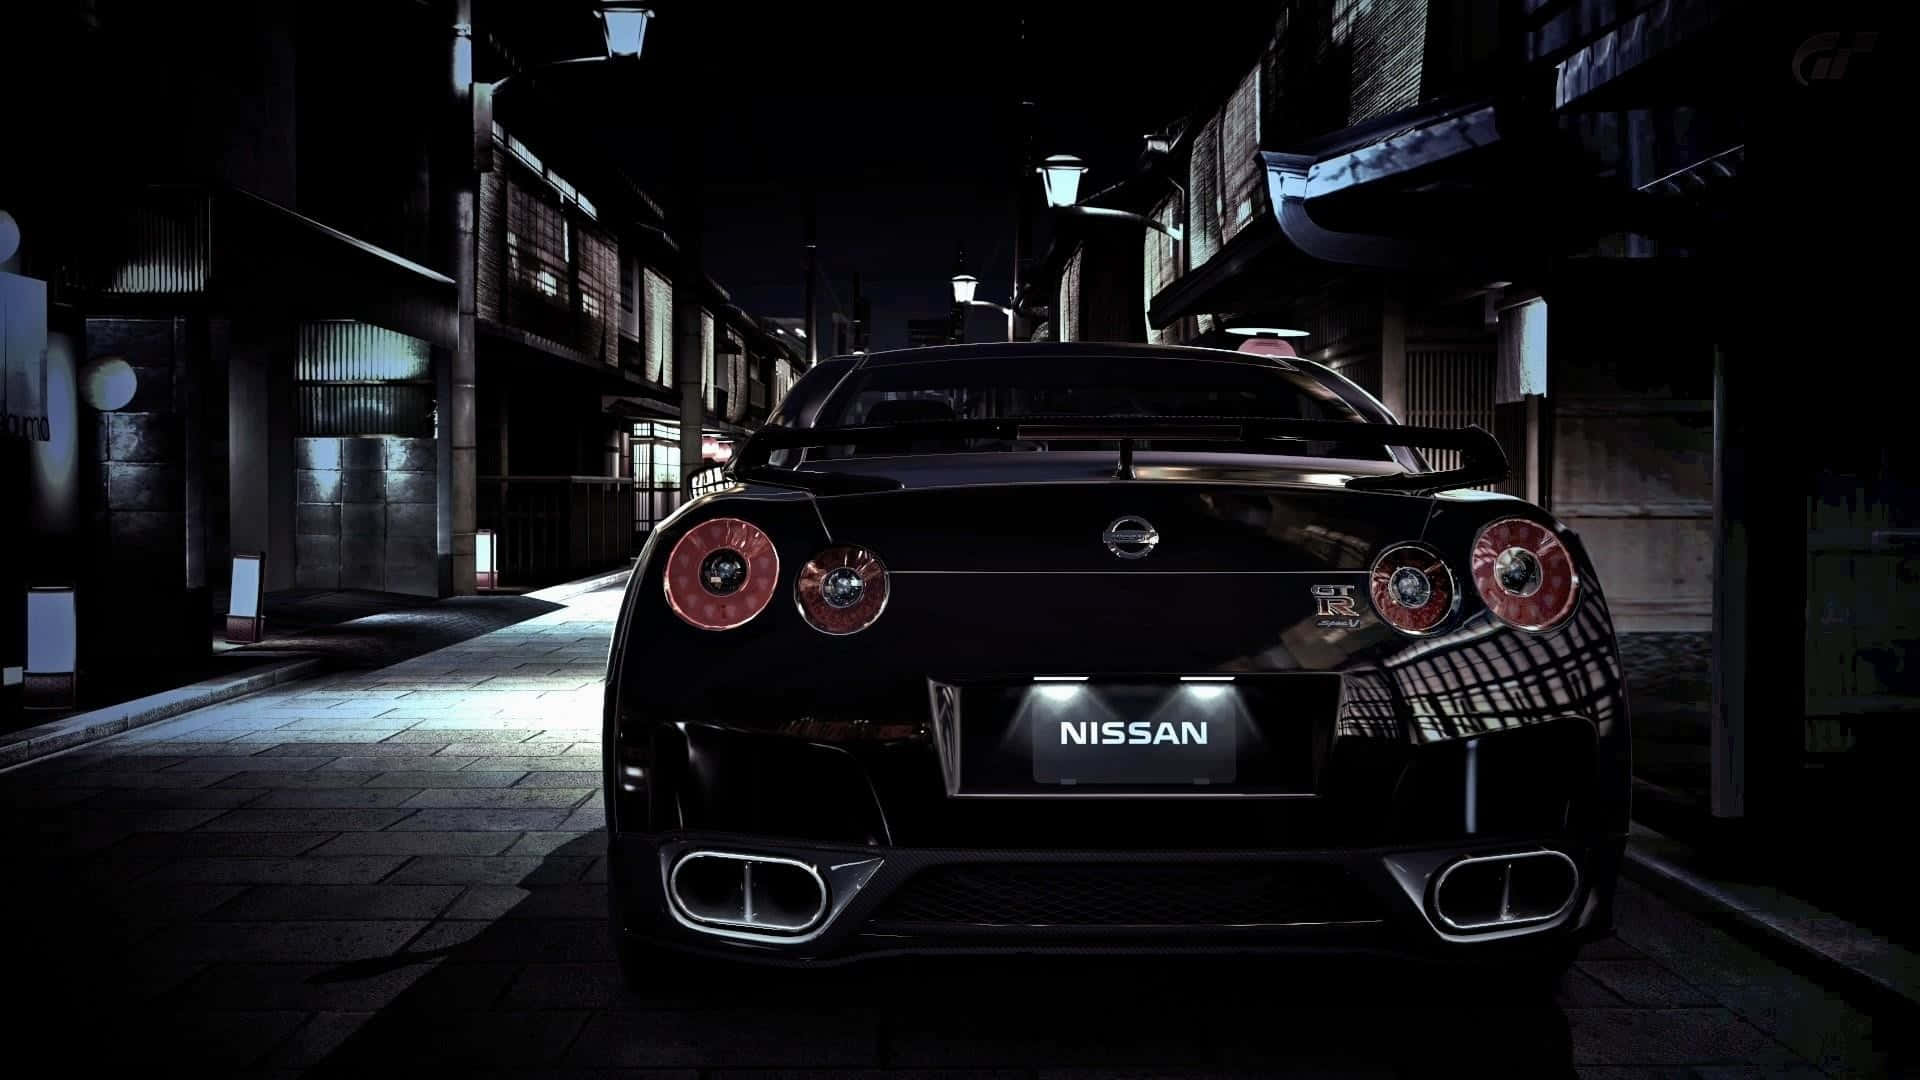 A Glimpse of the Iconic Nissan GTR Racecar